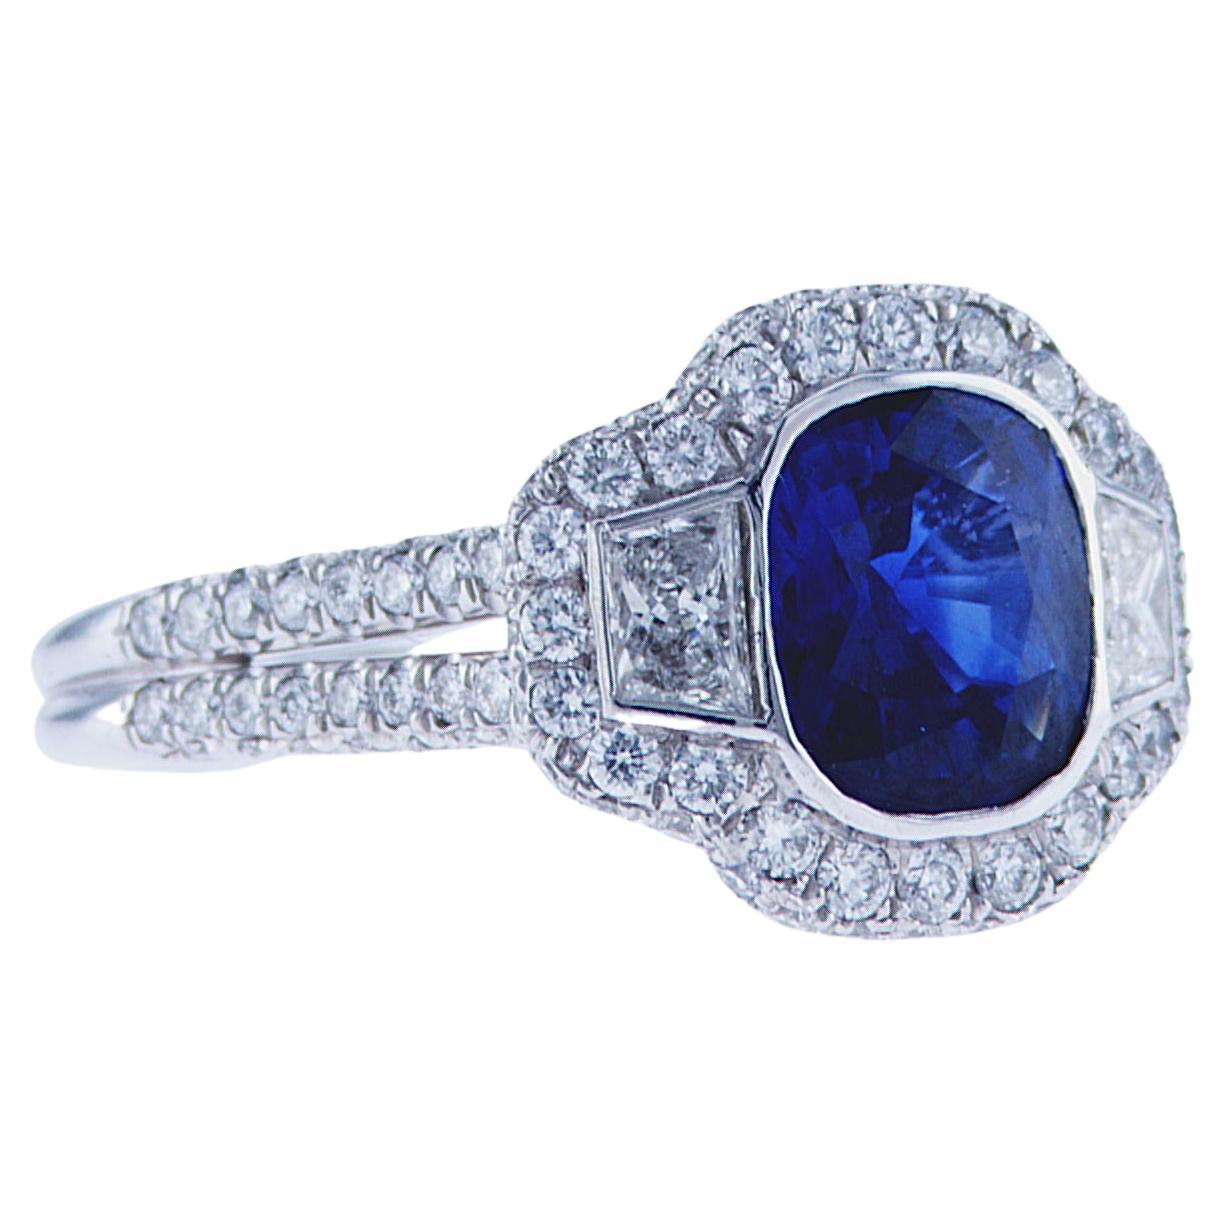 1.92ct Sapphire Cocktail Ring with Trapezoid Diamond Accents